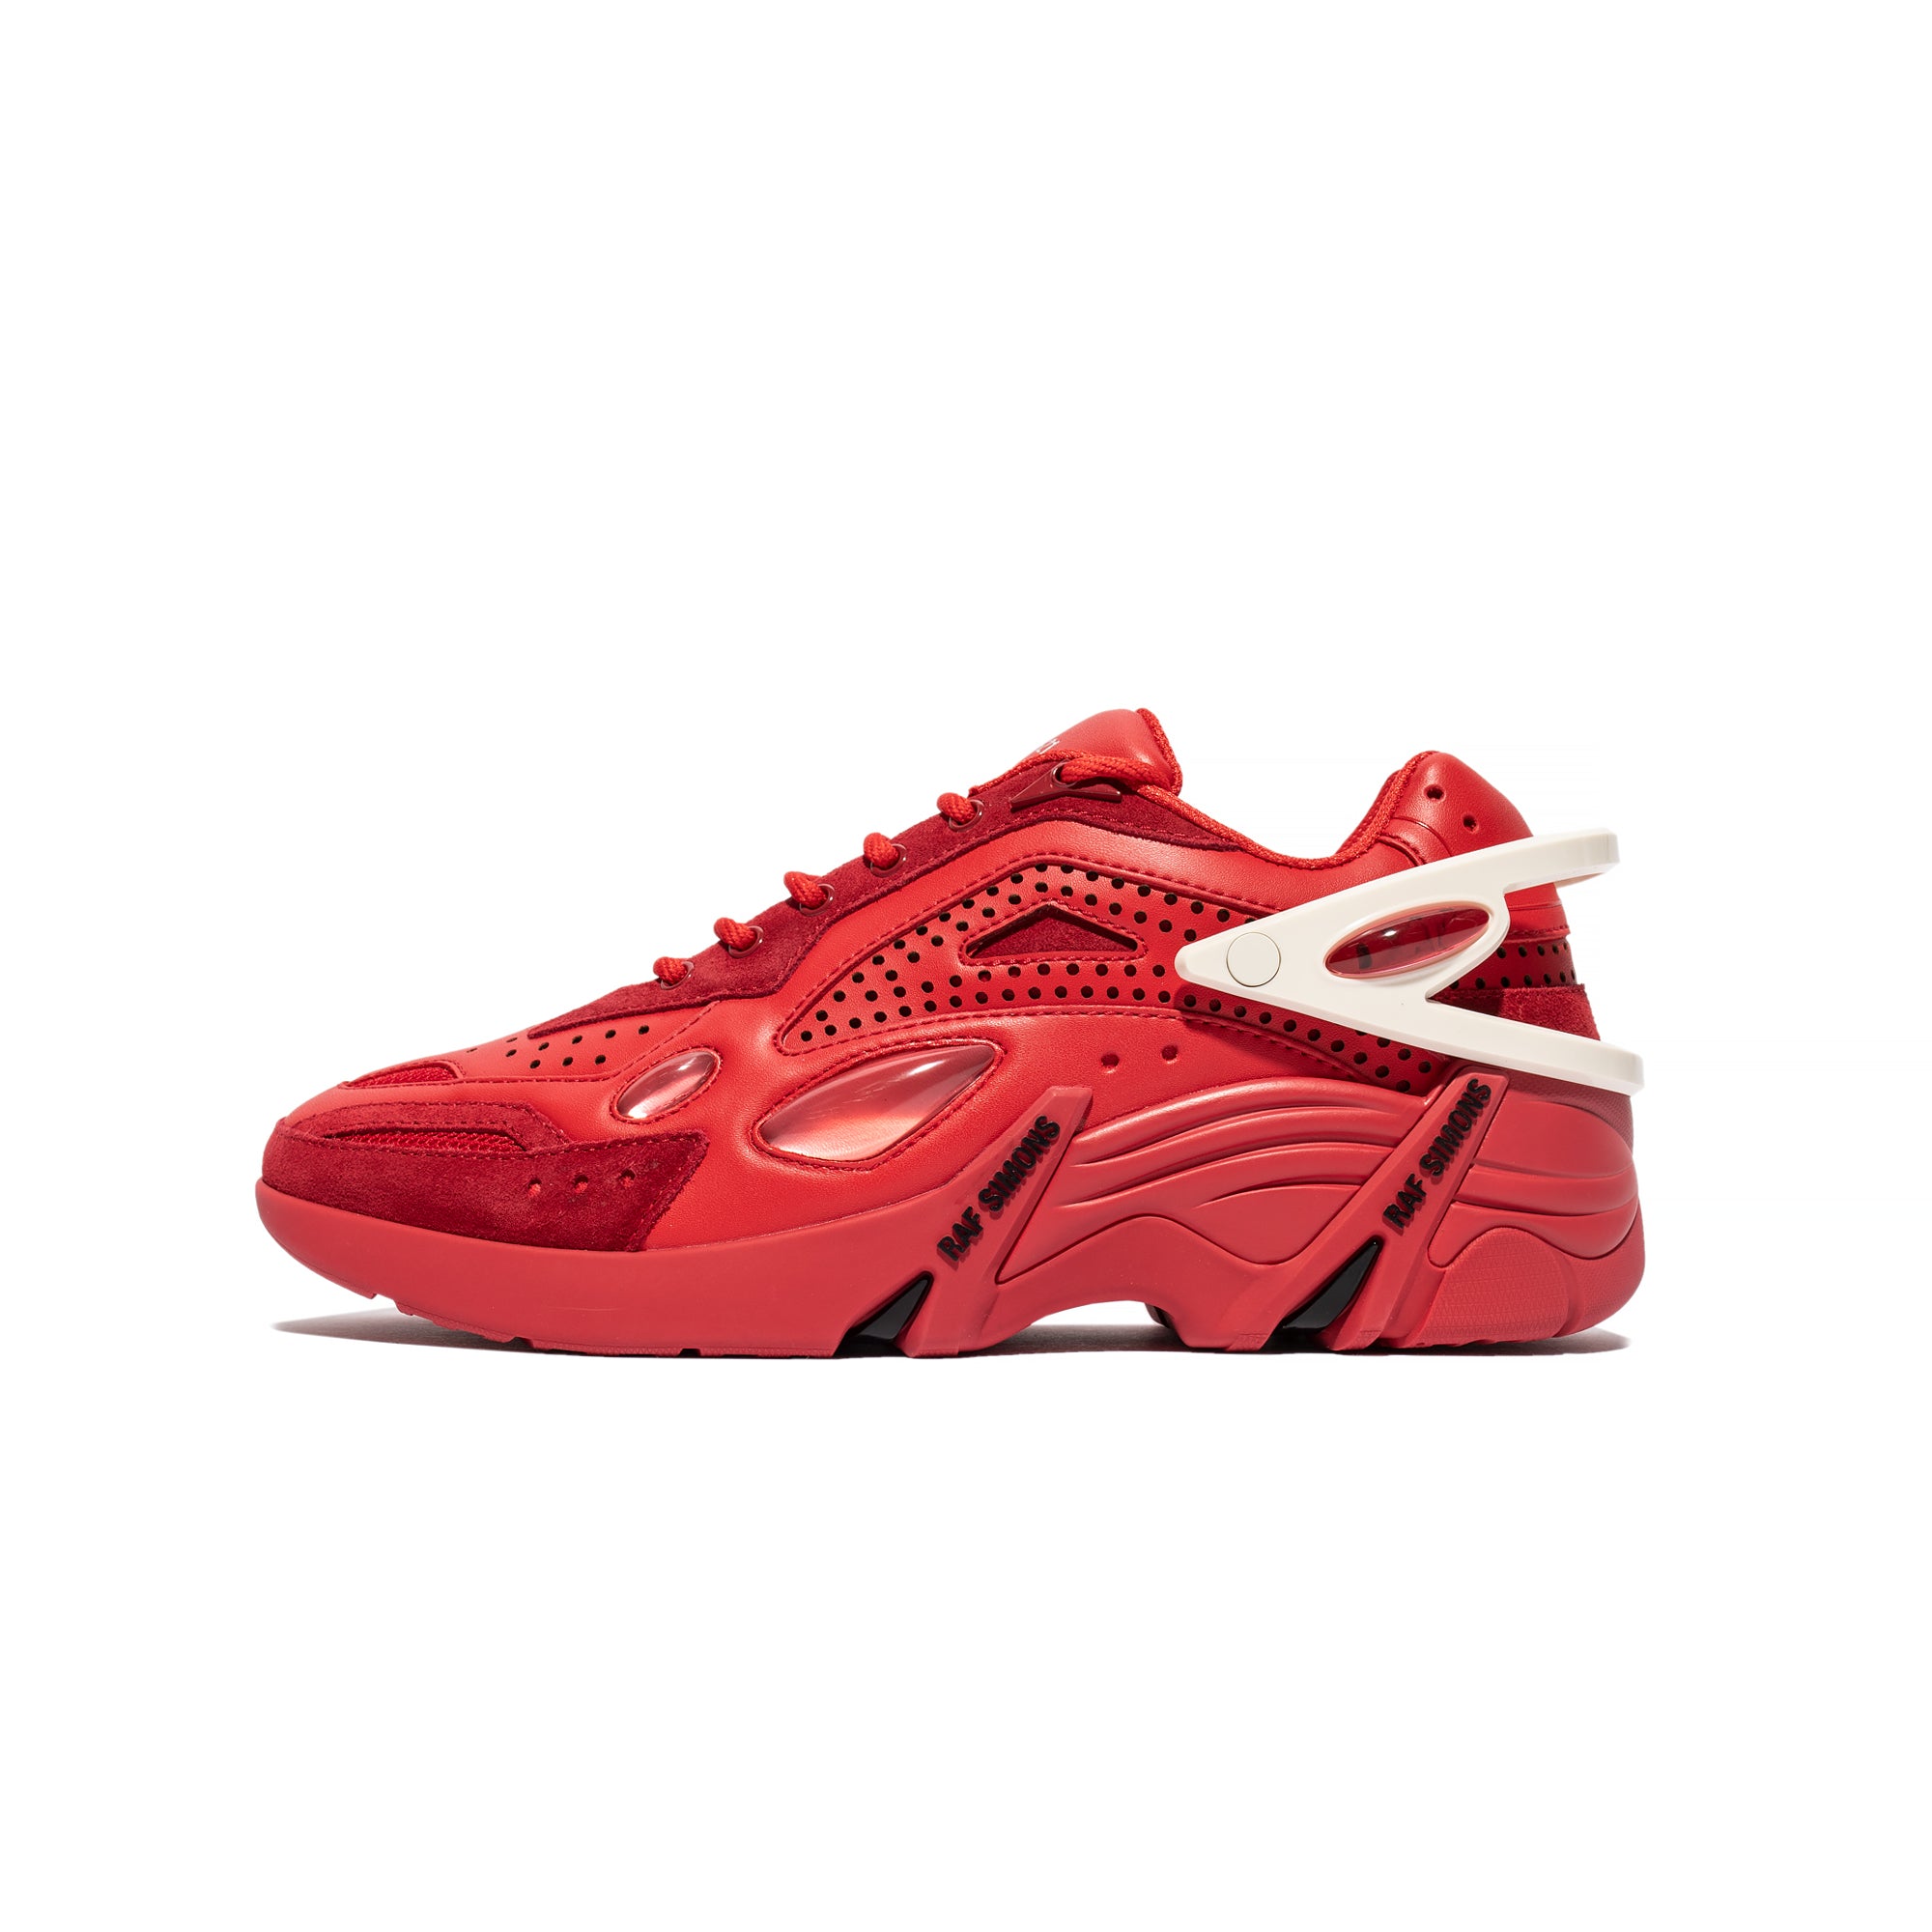 Raf Simons Cylon-21 Shoes 'Red' – Extra Butter